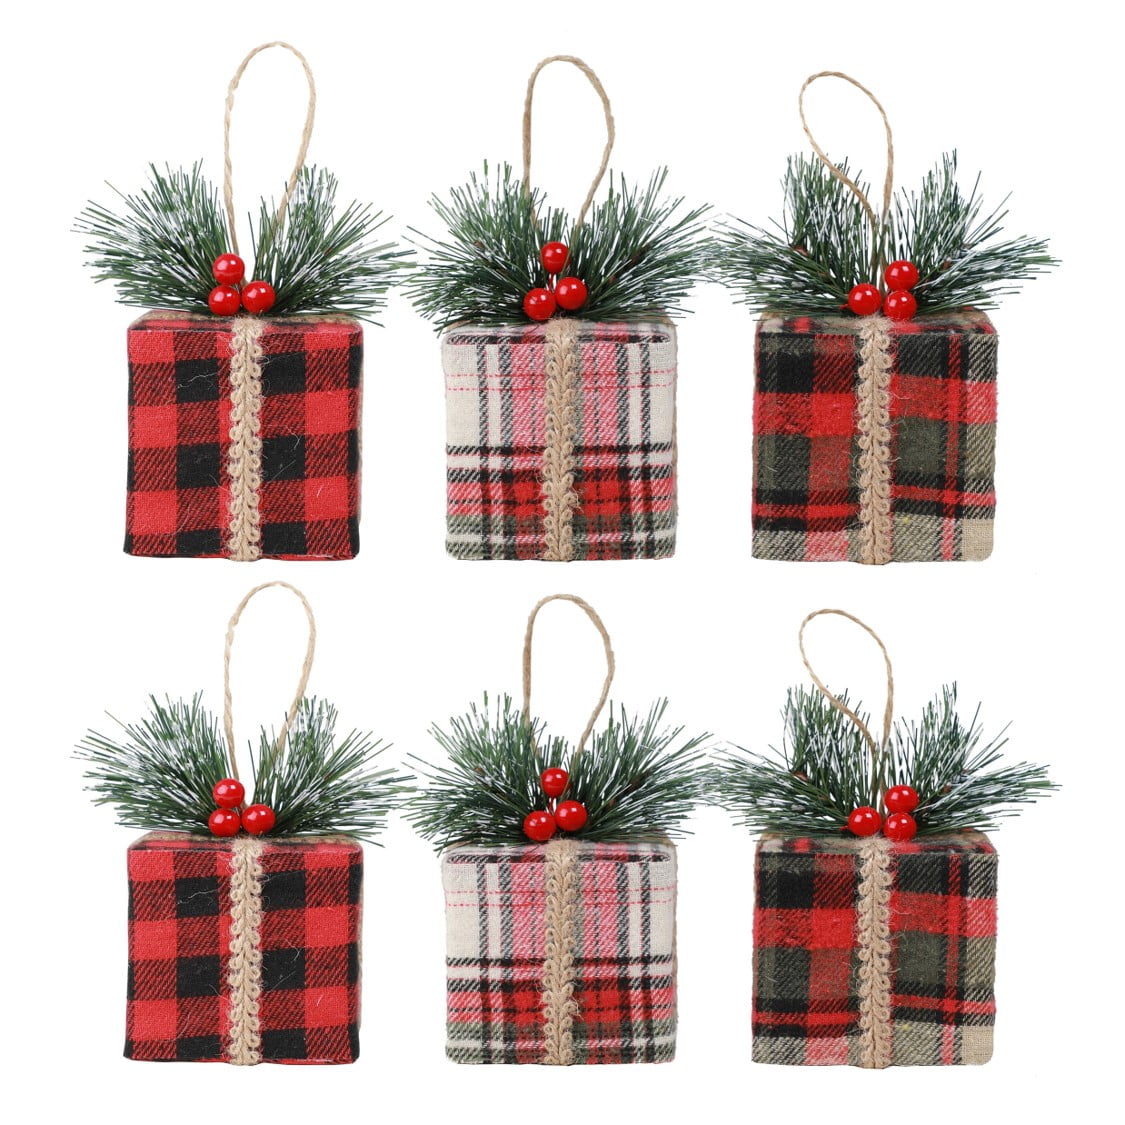 2 SETS OF 6 SANTA BAUBLES in GIFT BOXES